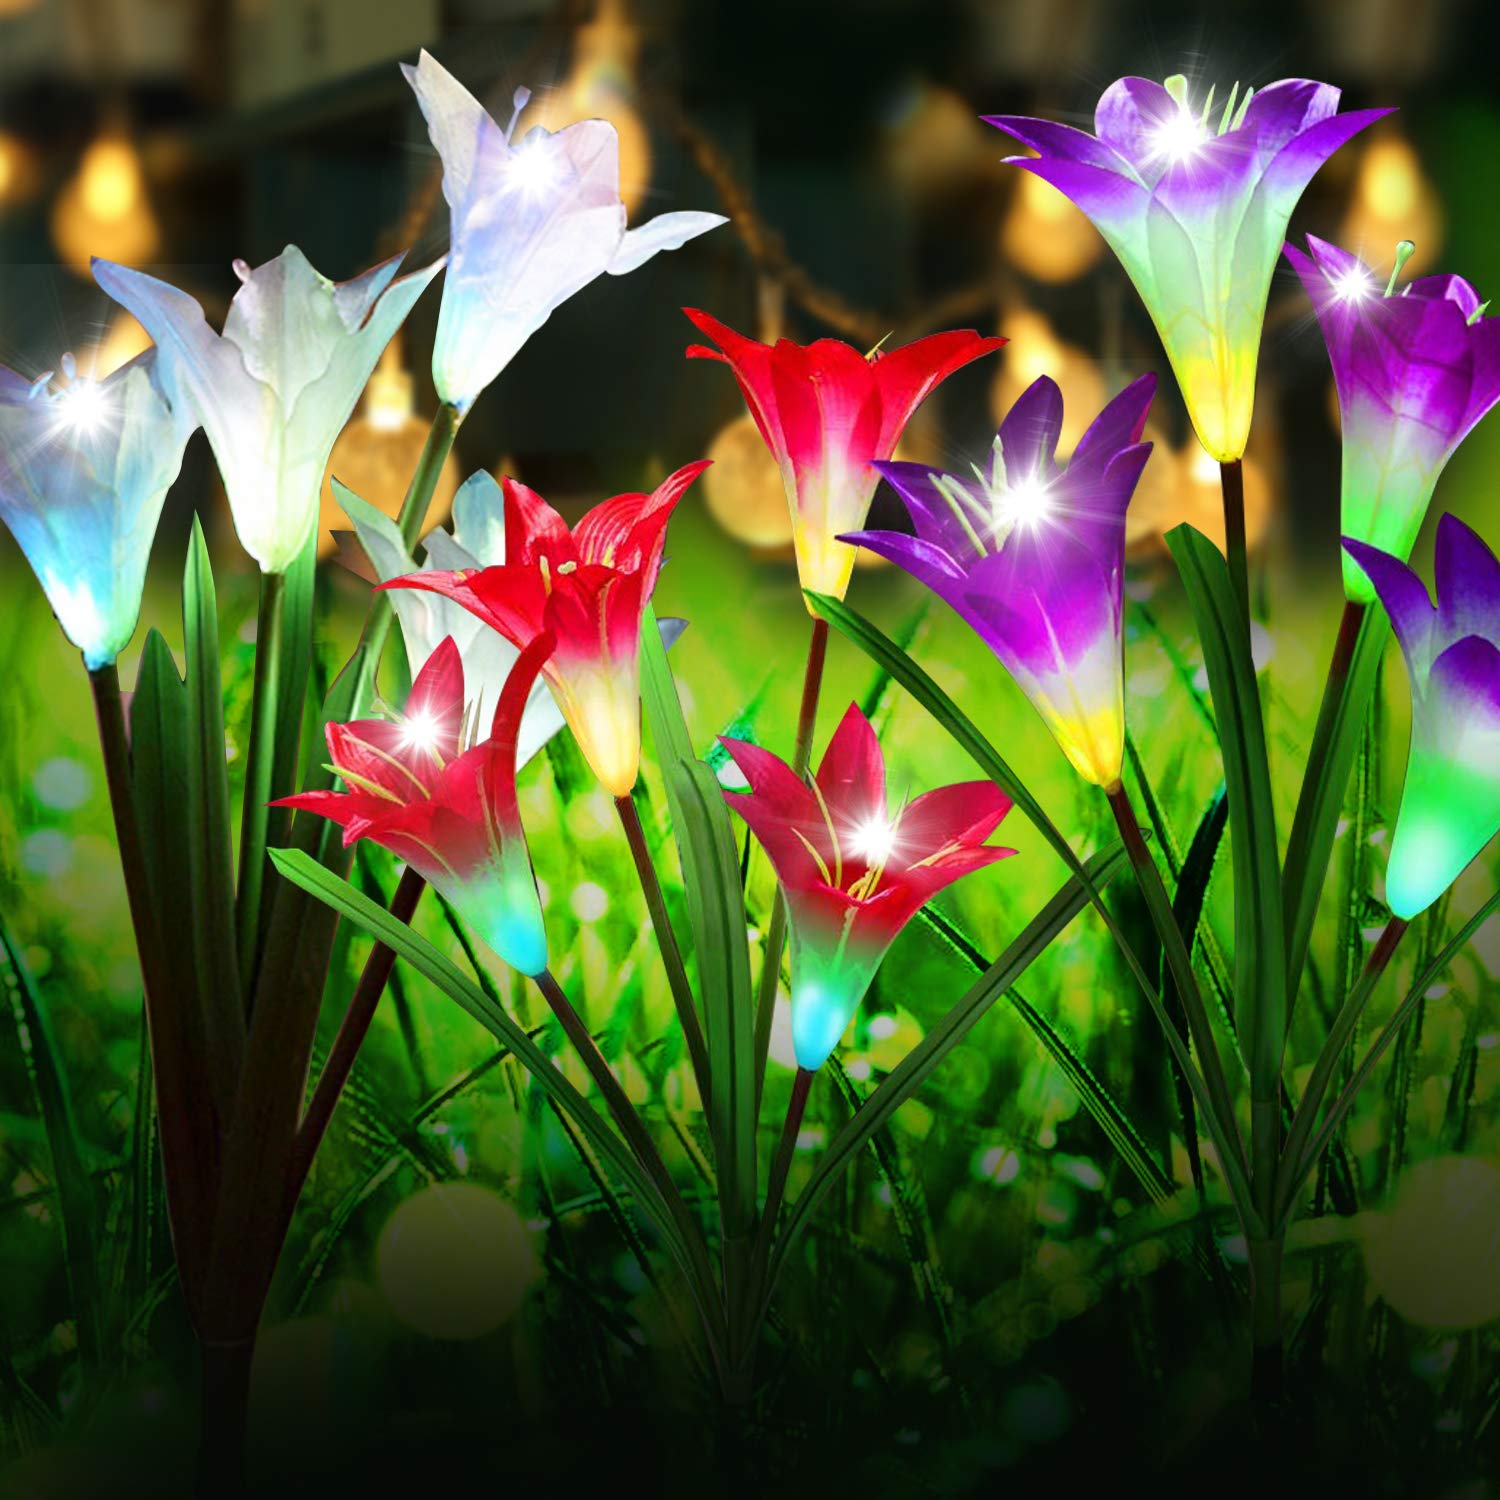 Artificial Waterproof Lily Solar Garden Stake Lights (1 Pack of 4 Lili